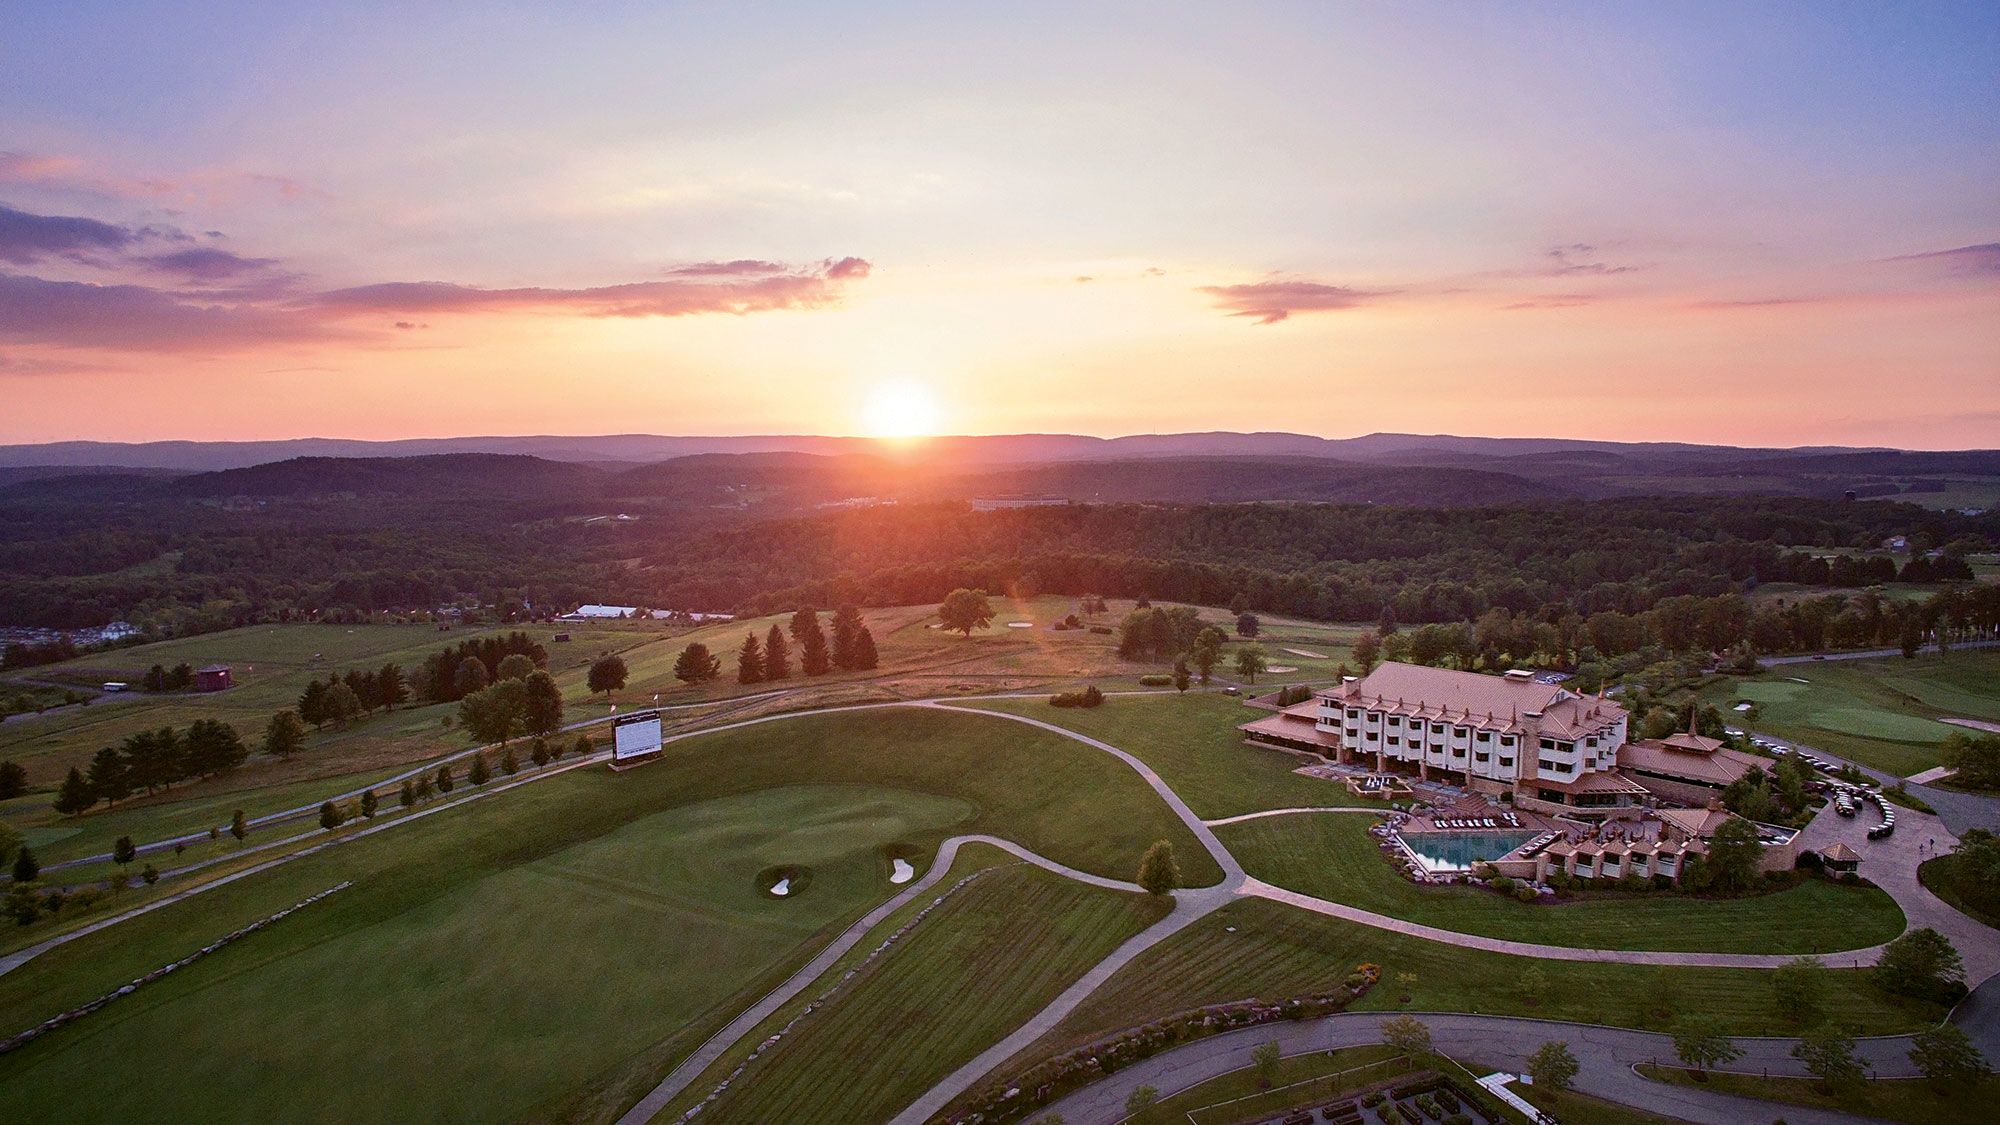 Falling Rock is one of five accommodations options at the 2,000-acre Nemacolin resort in Fayette County, Pa.